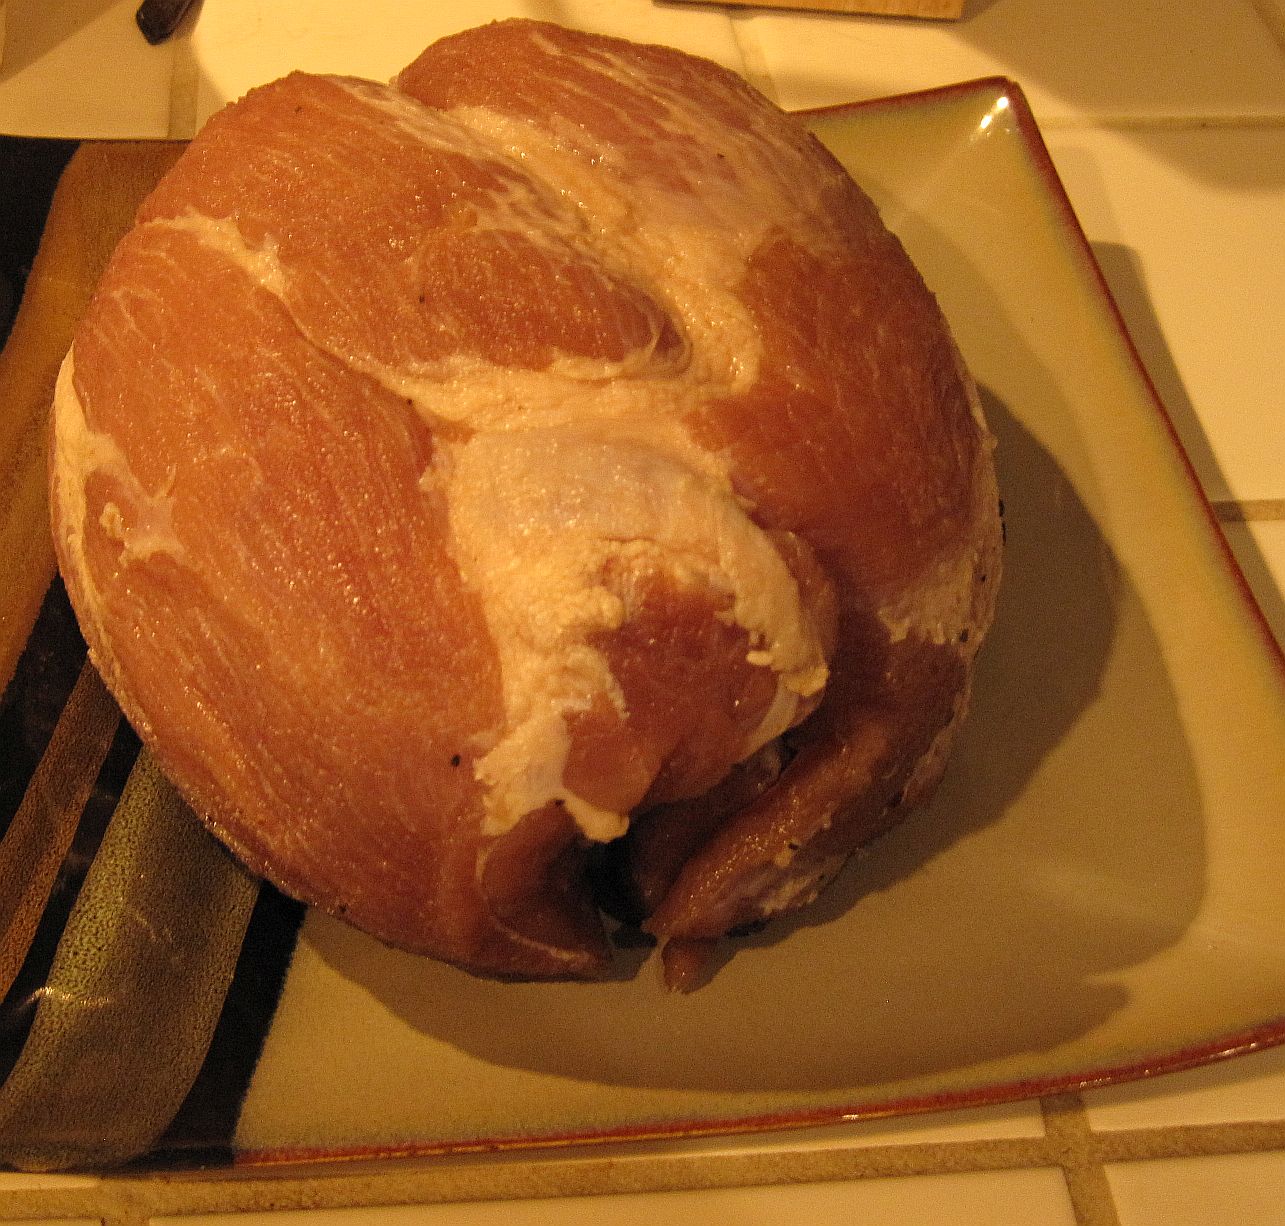 raw brined ham on a plate, ready to cook